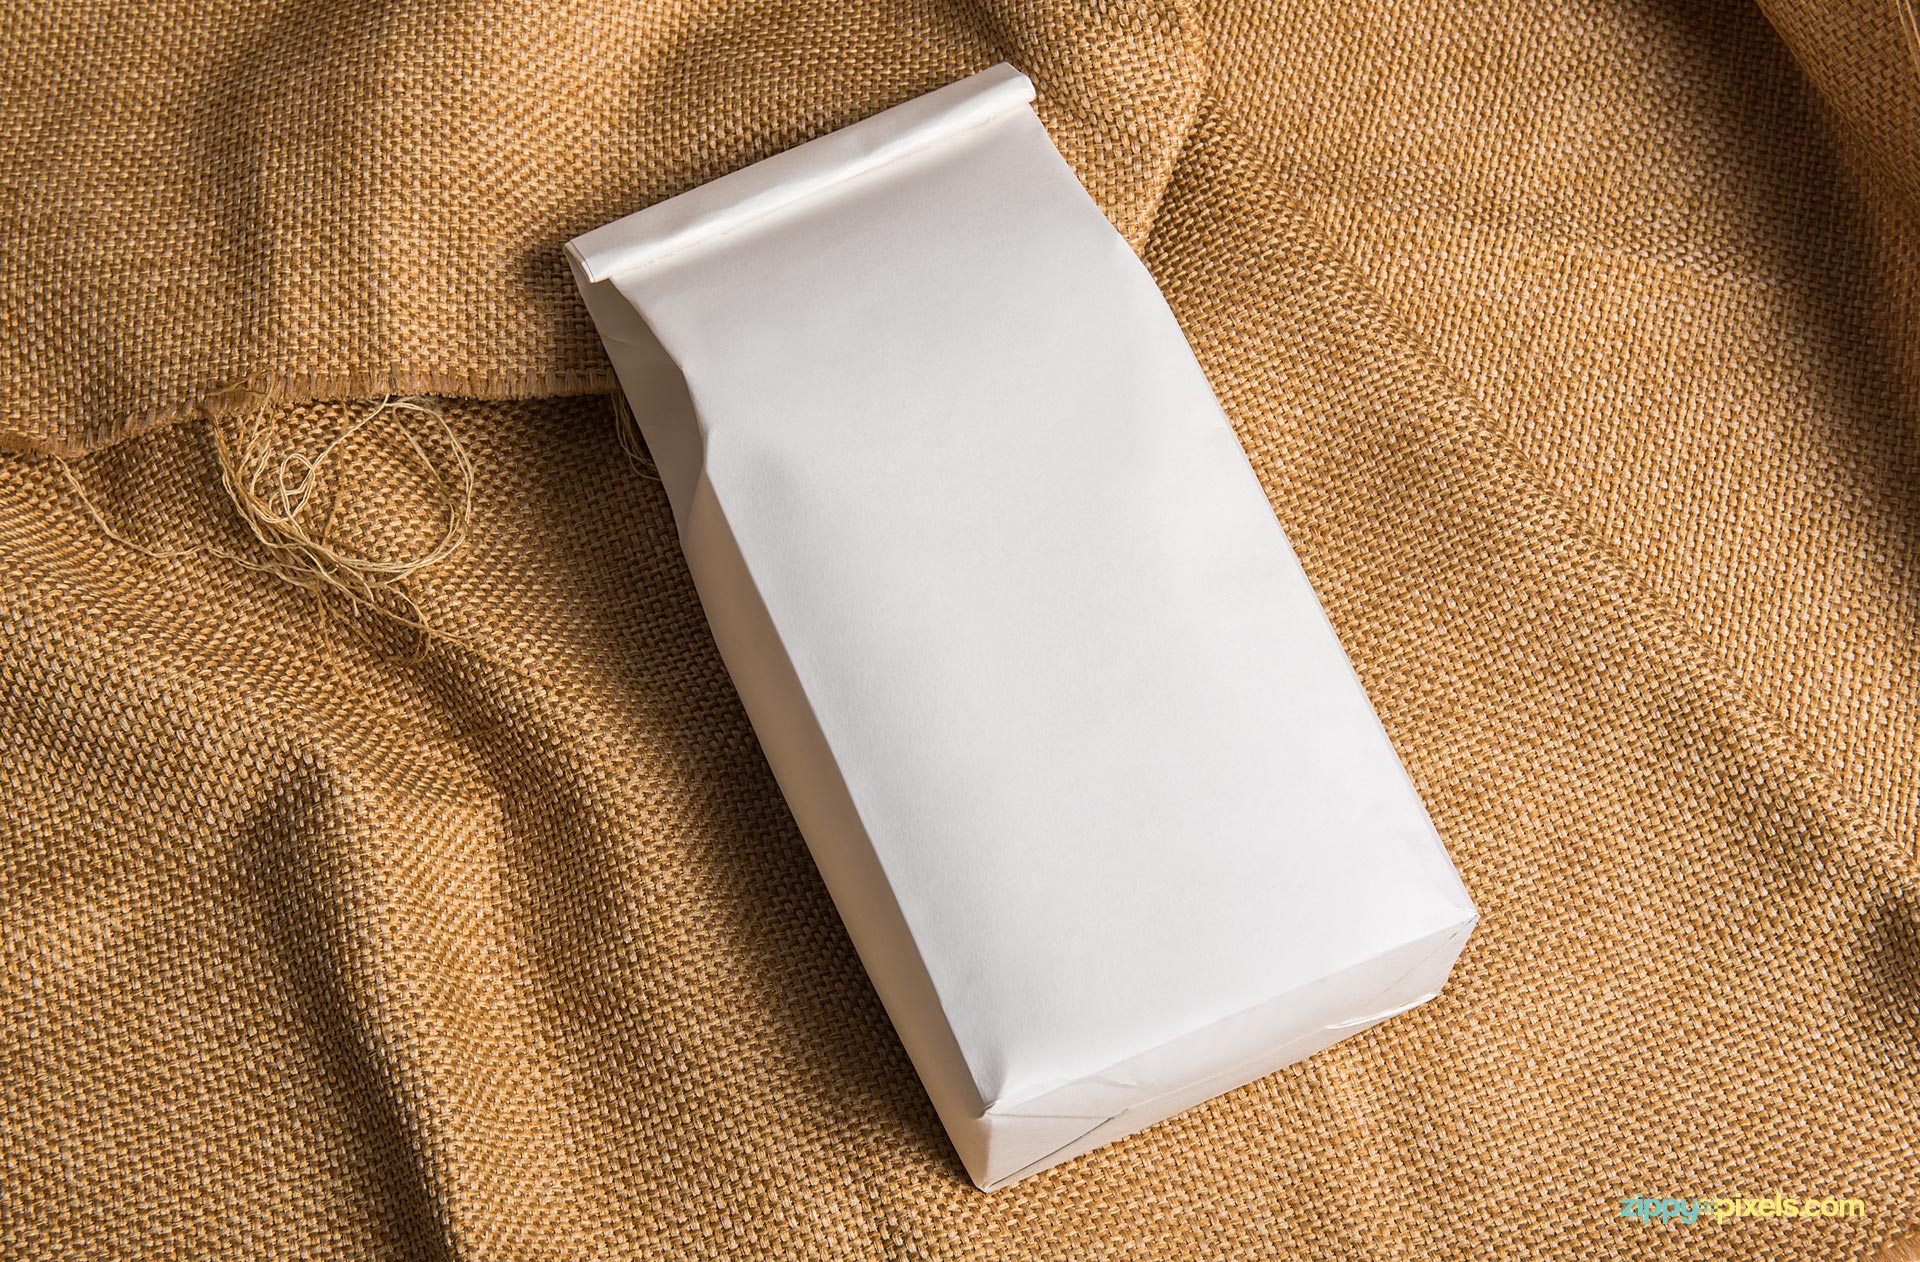 PSD of plain packaging pouch mockup.